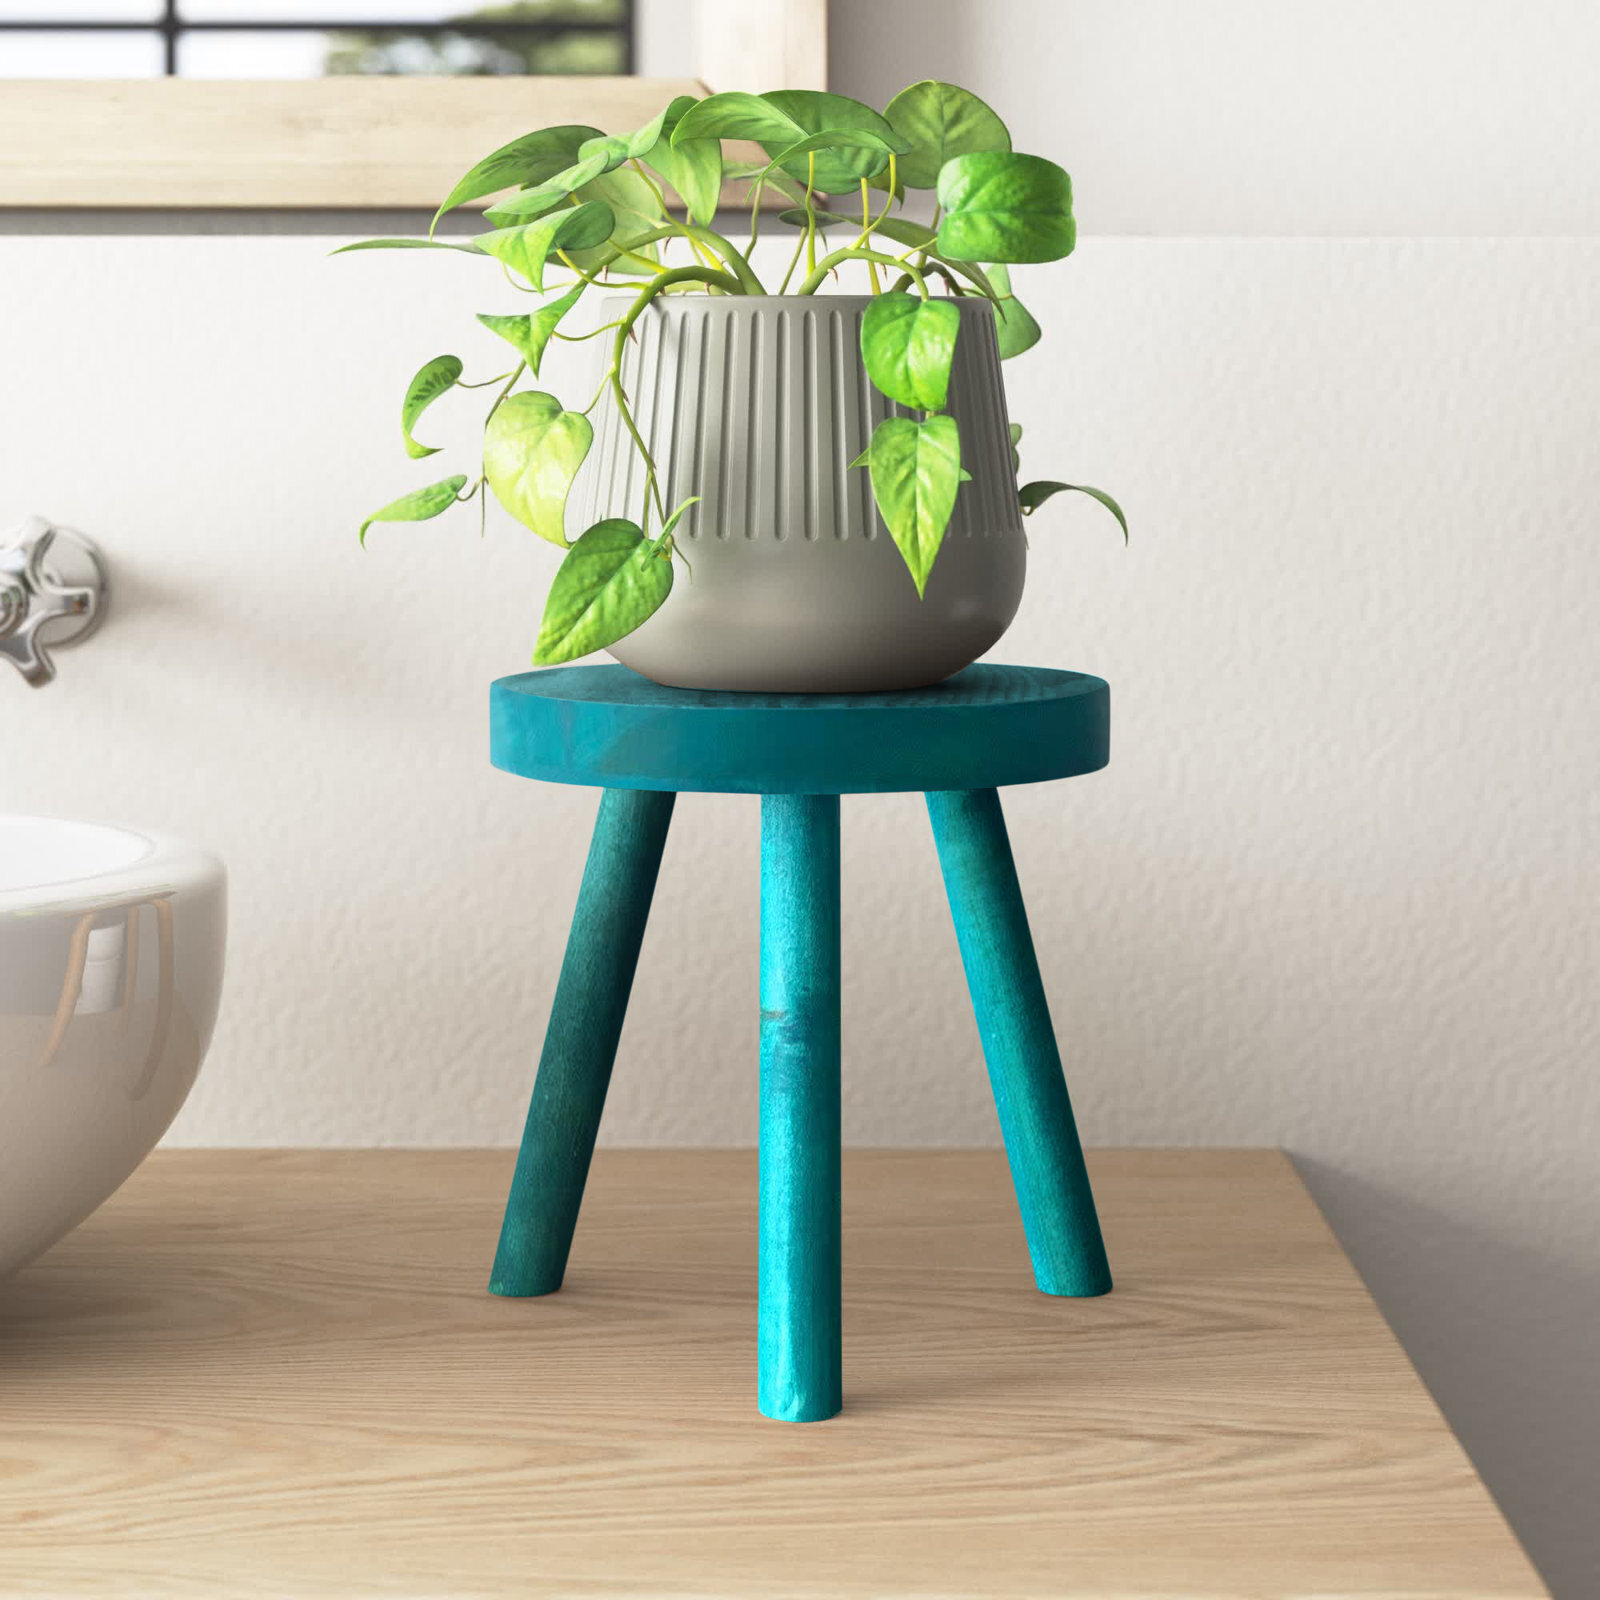 Vibrant, retro plant stand with flared legs